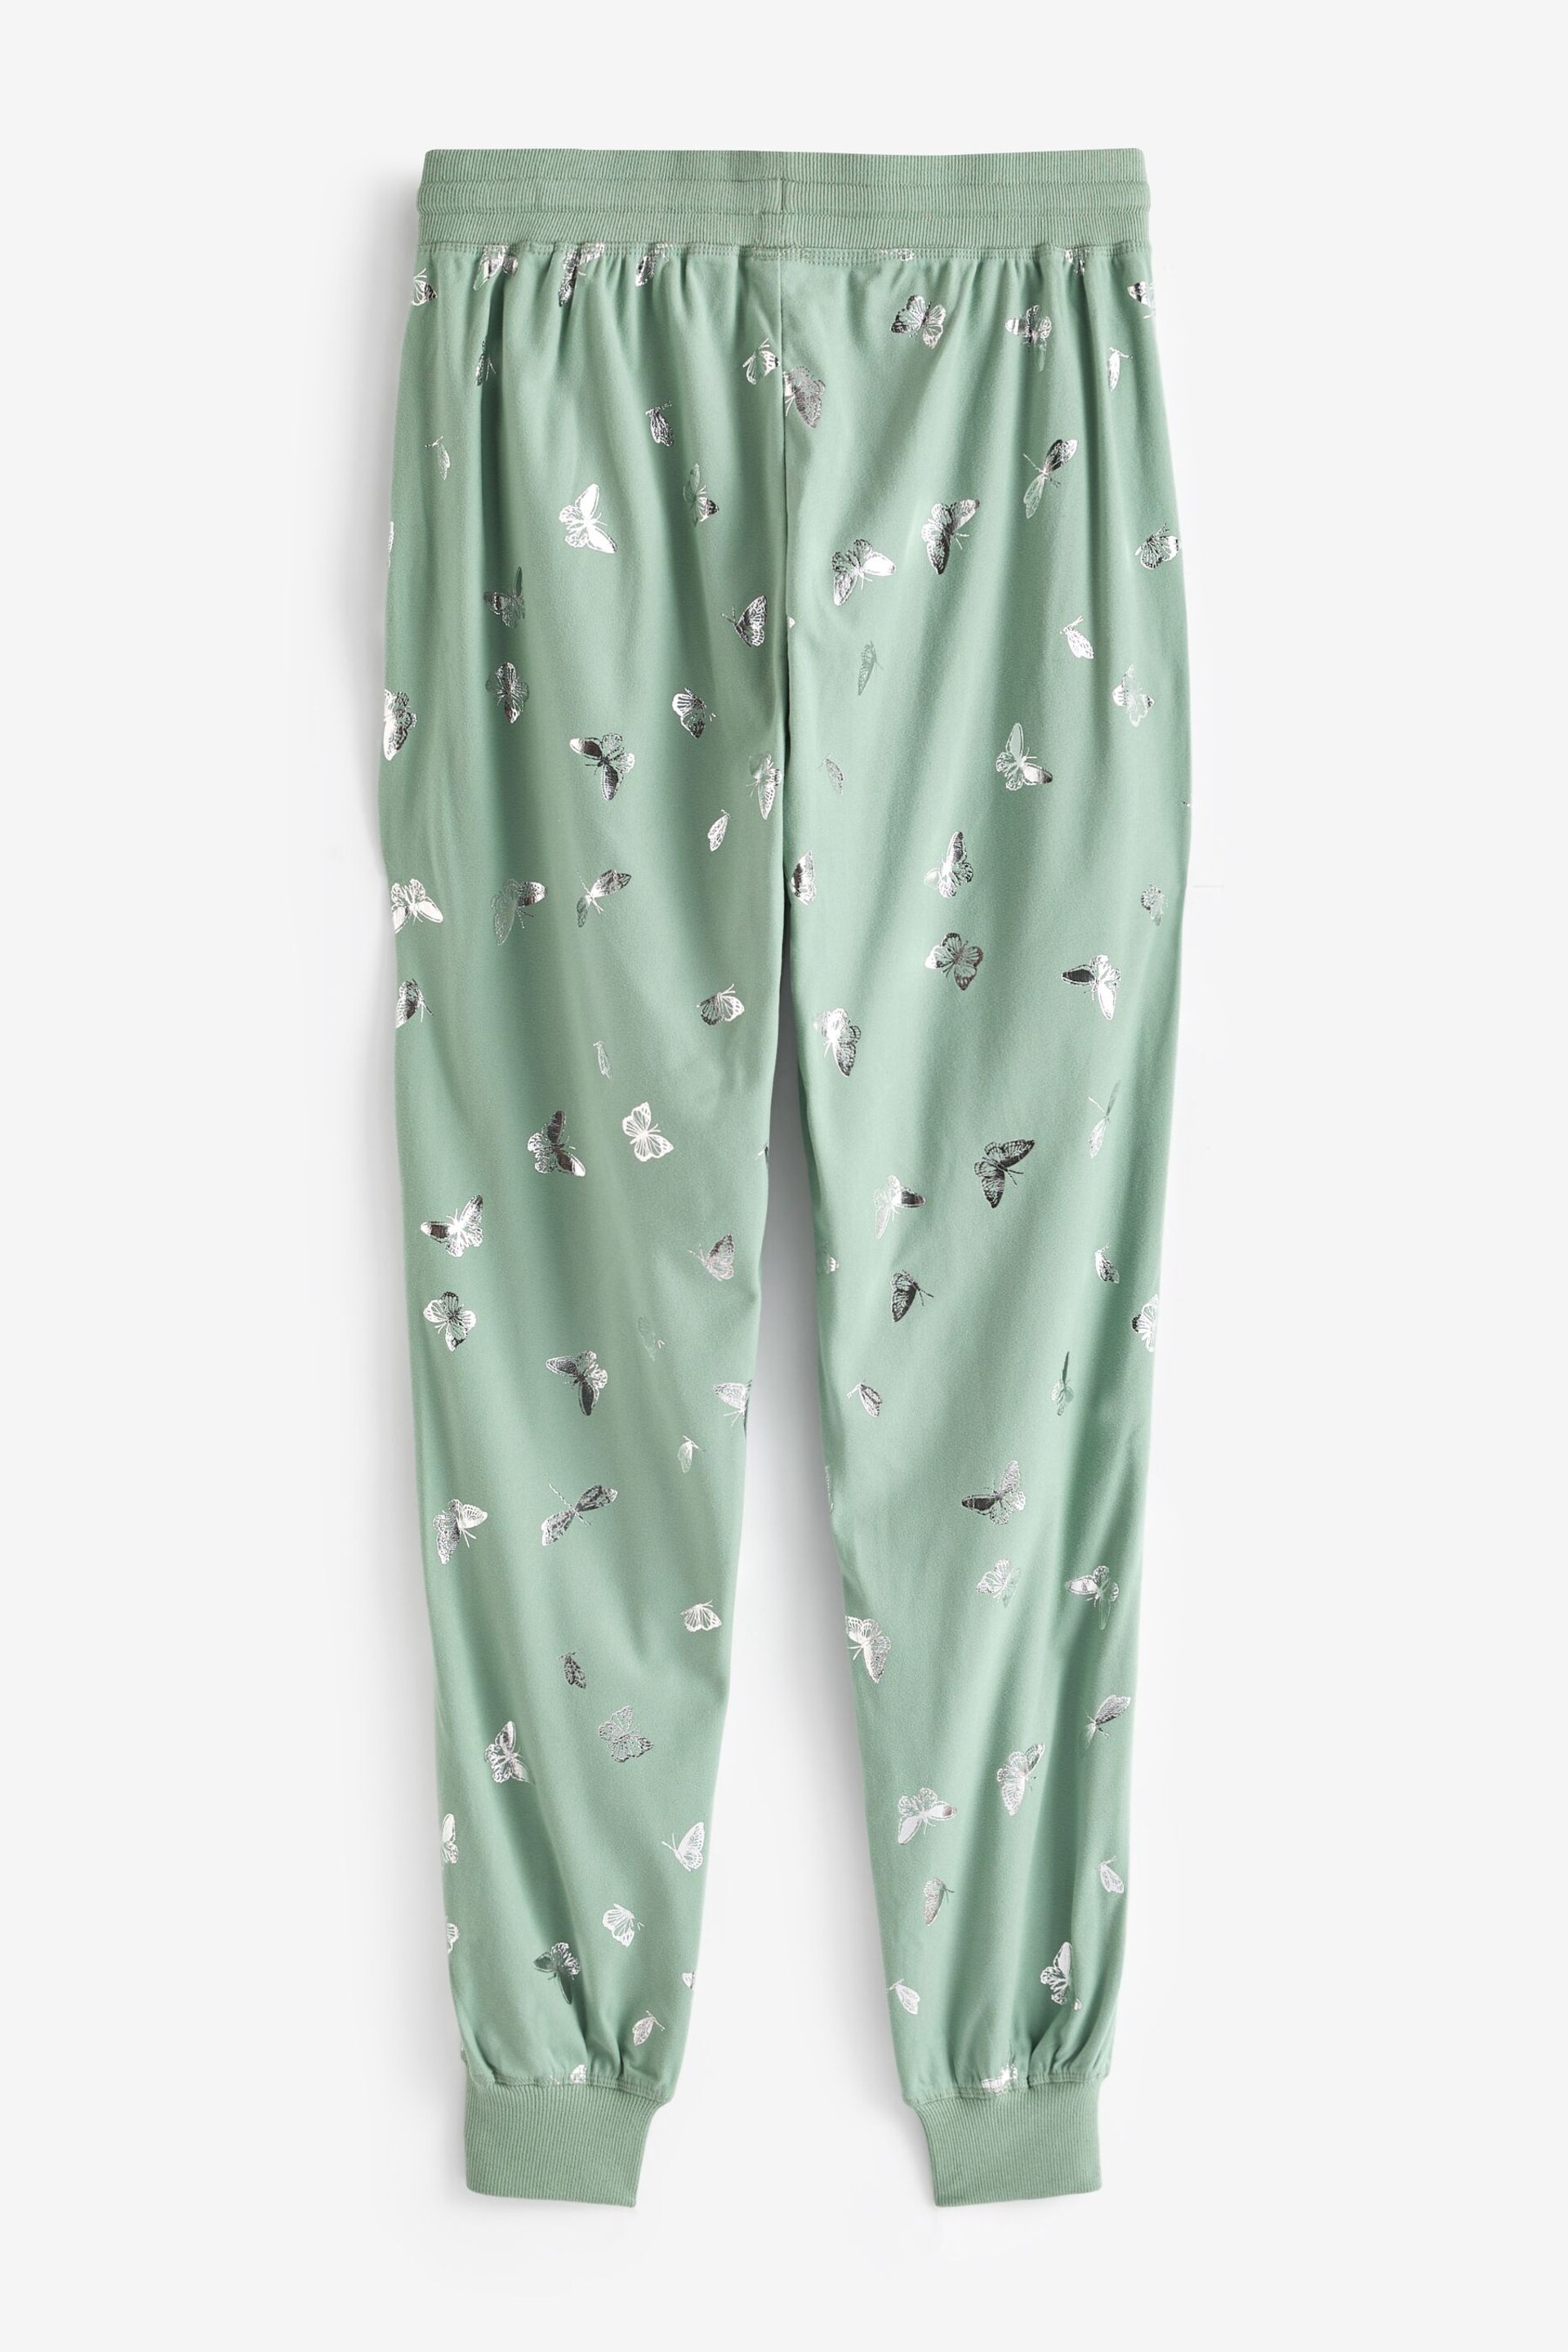 Sage Green Butterfly Foil Supersoft Cosy Pyjamas - Image 10 of 11